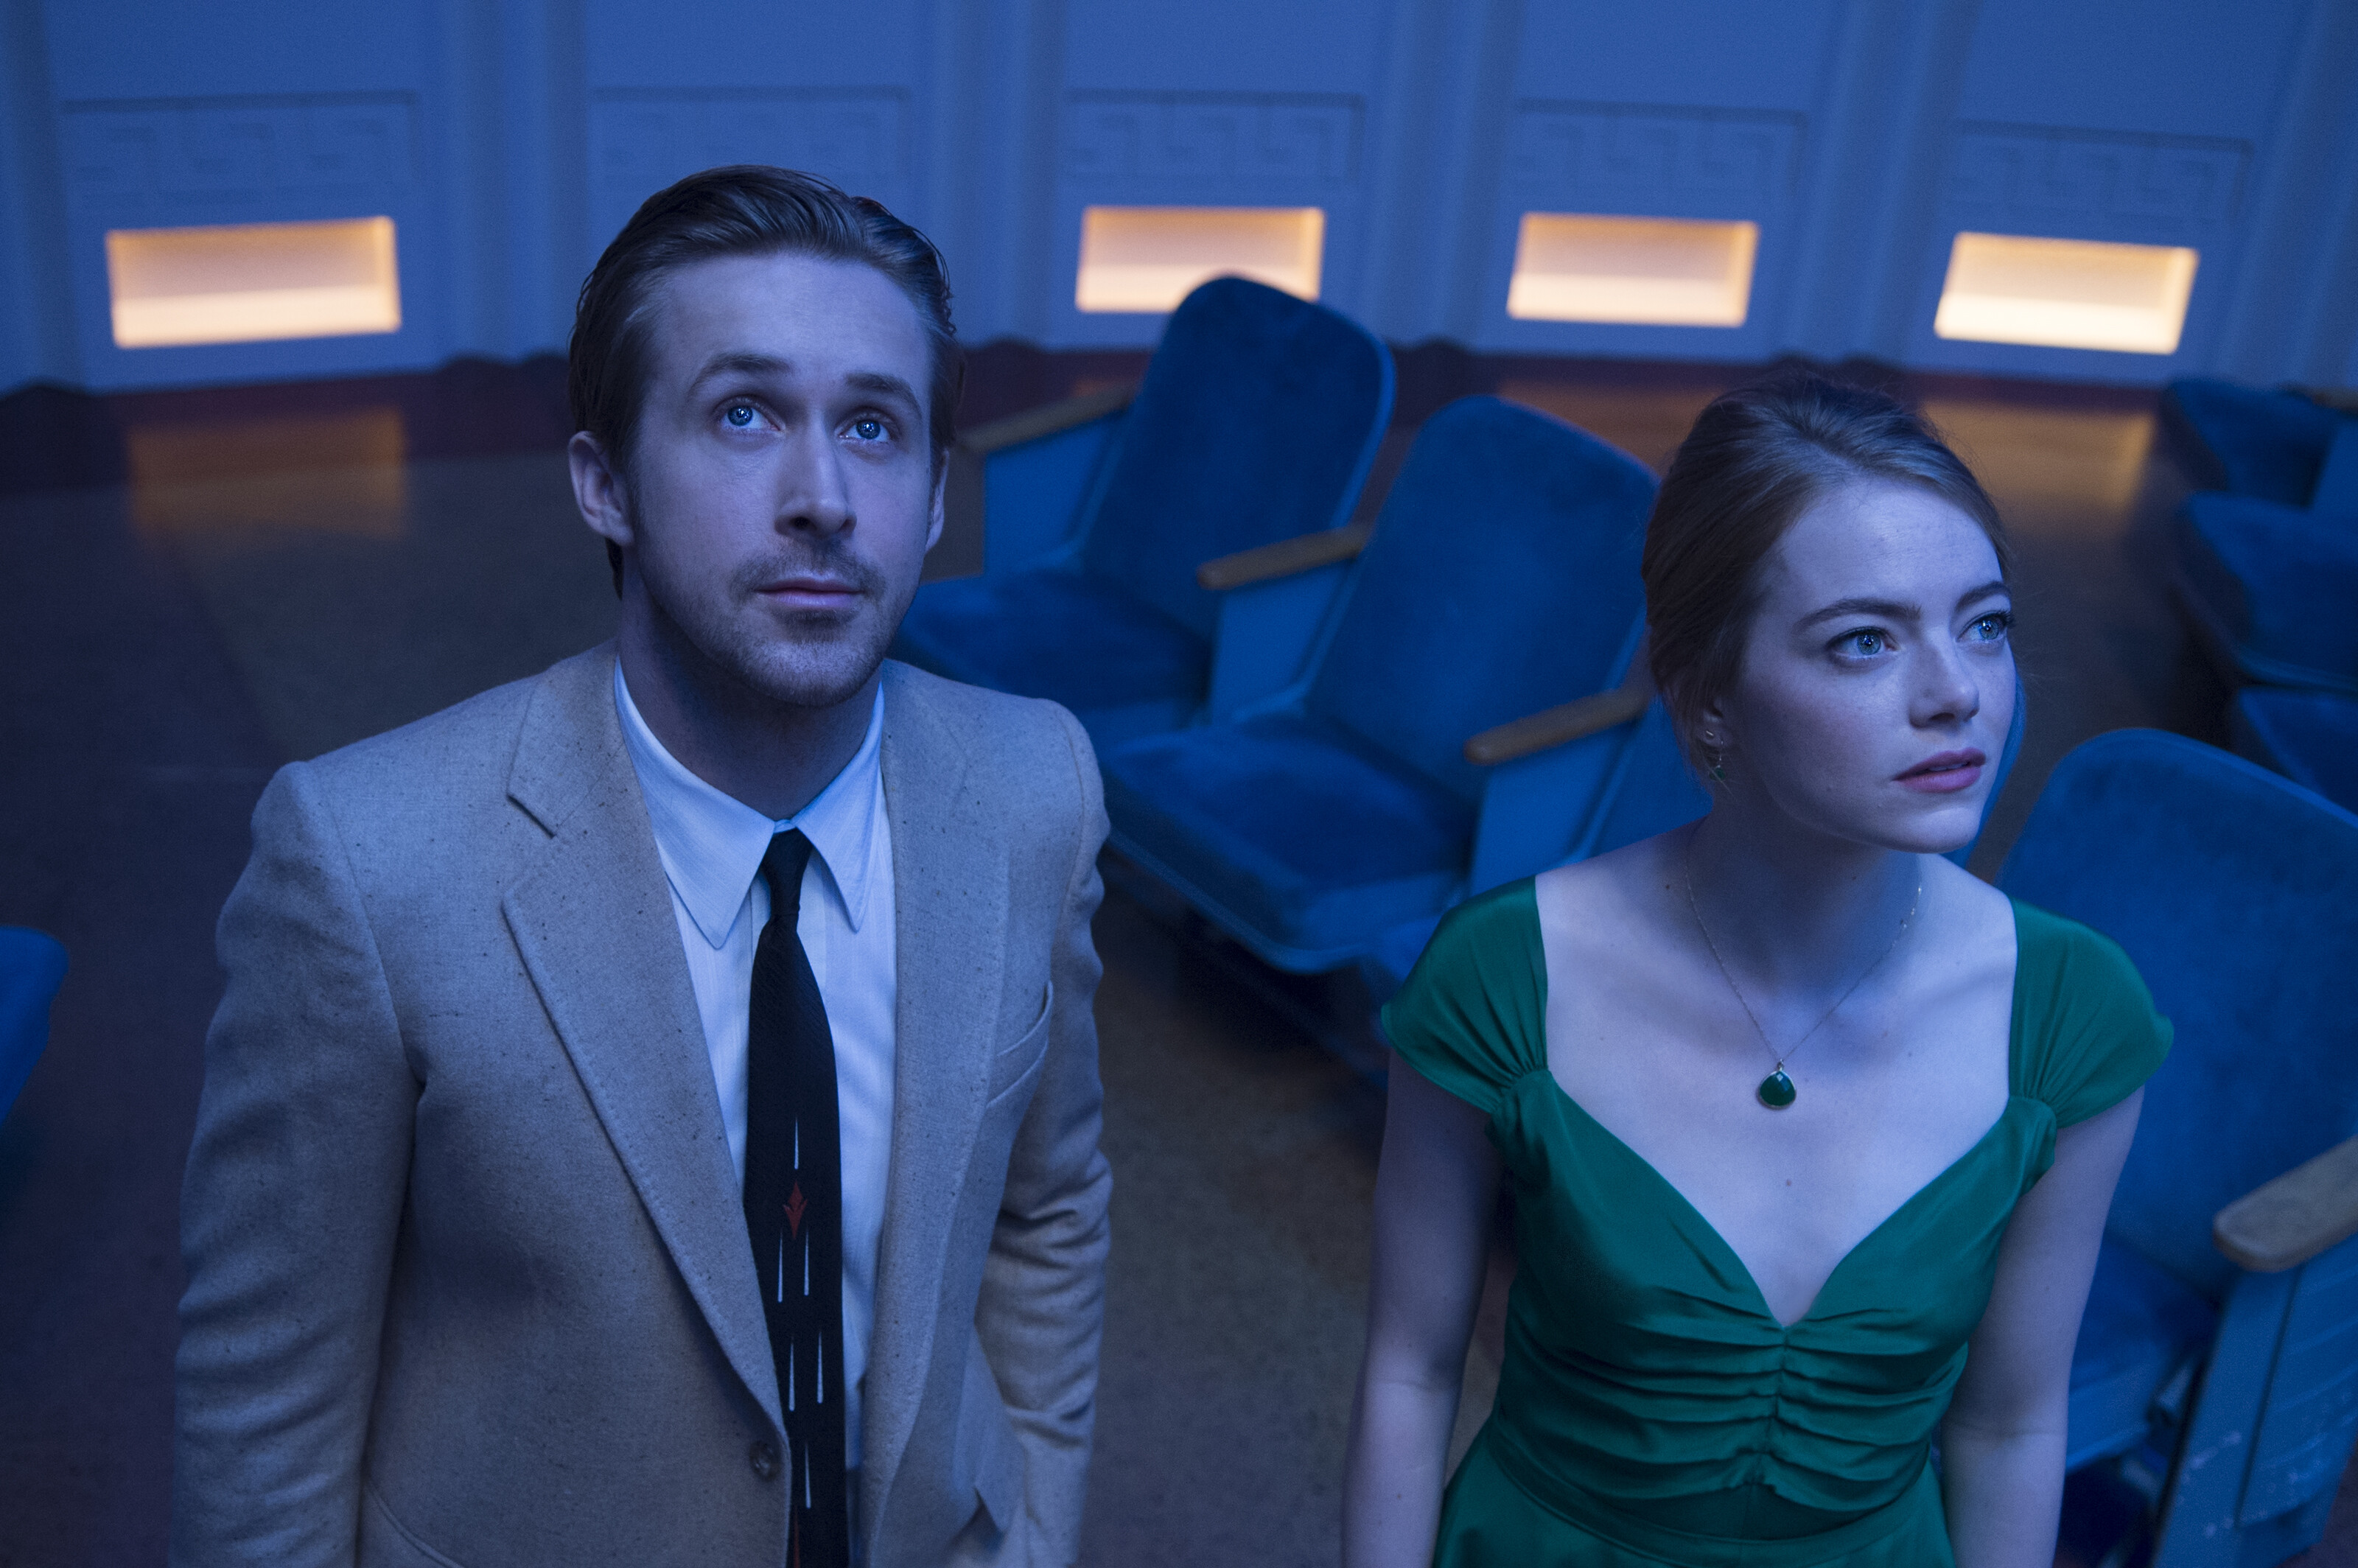 La La Land: Career aspirations run up against bittersweet romance in modern-day Los Angeles, as two artists face a heartbreaking dilemma, 2016, Movie. 3200x2130 HD Background.